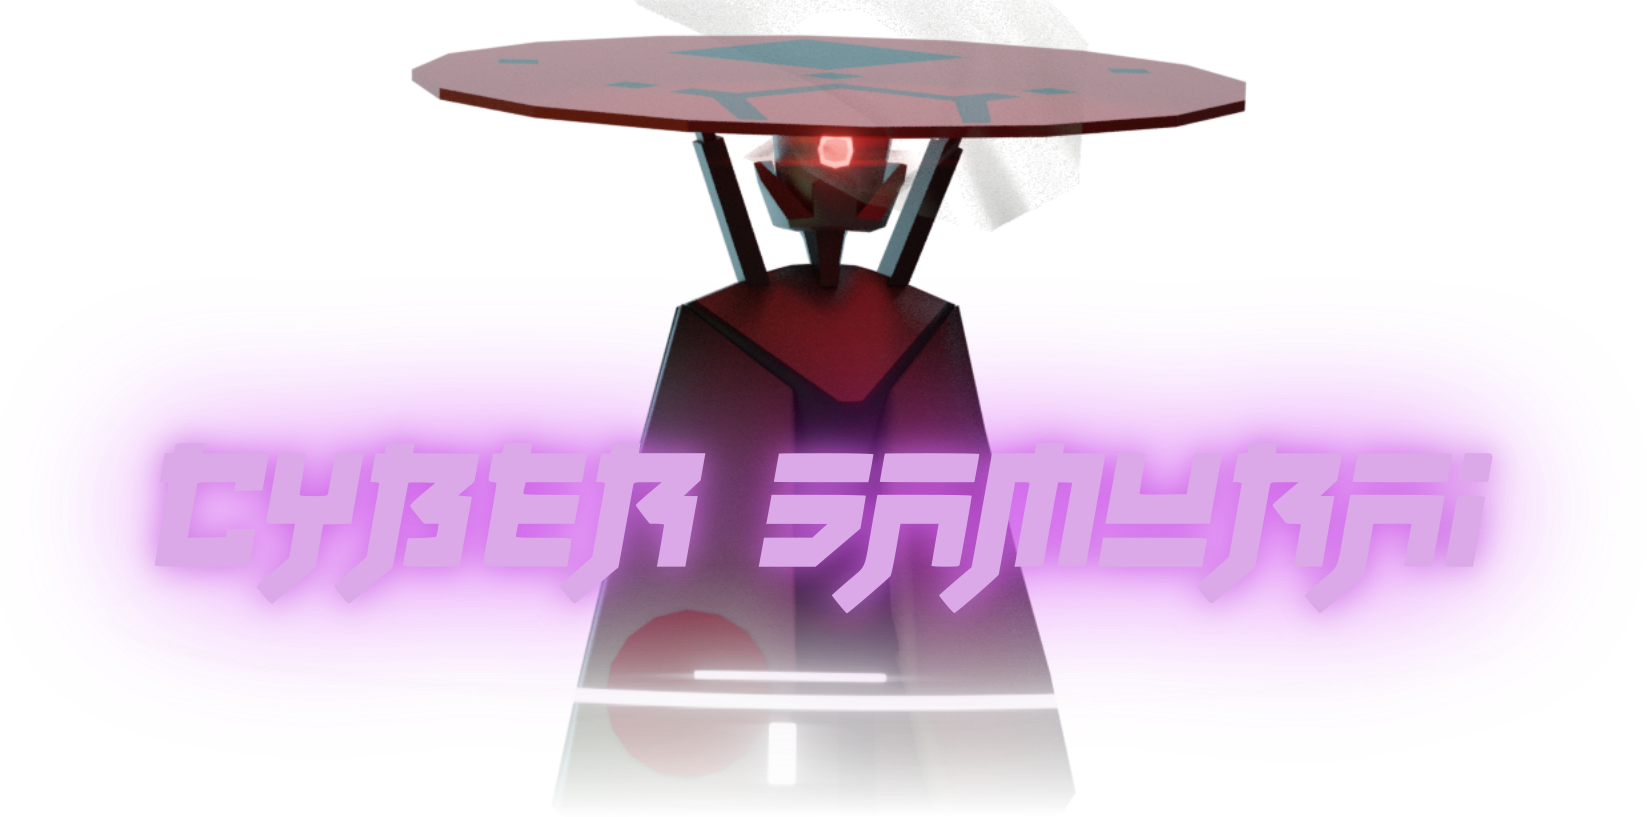 FREE Lowpoly Cyber Samurai character pack